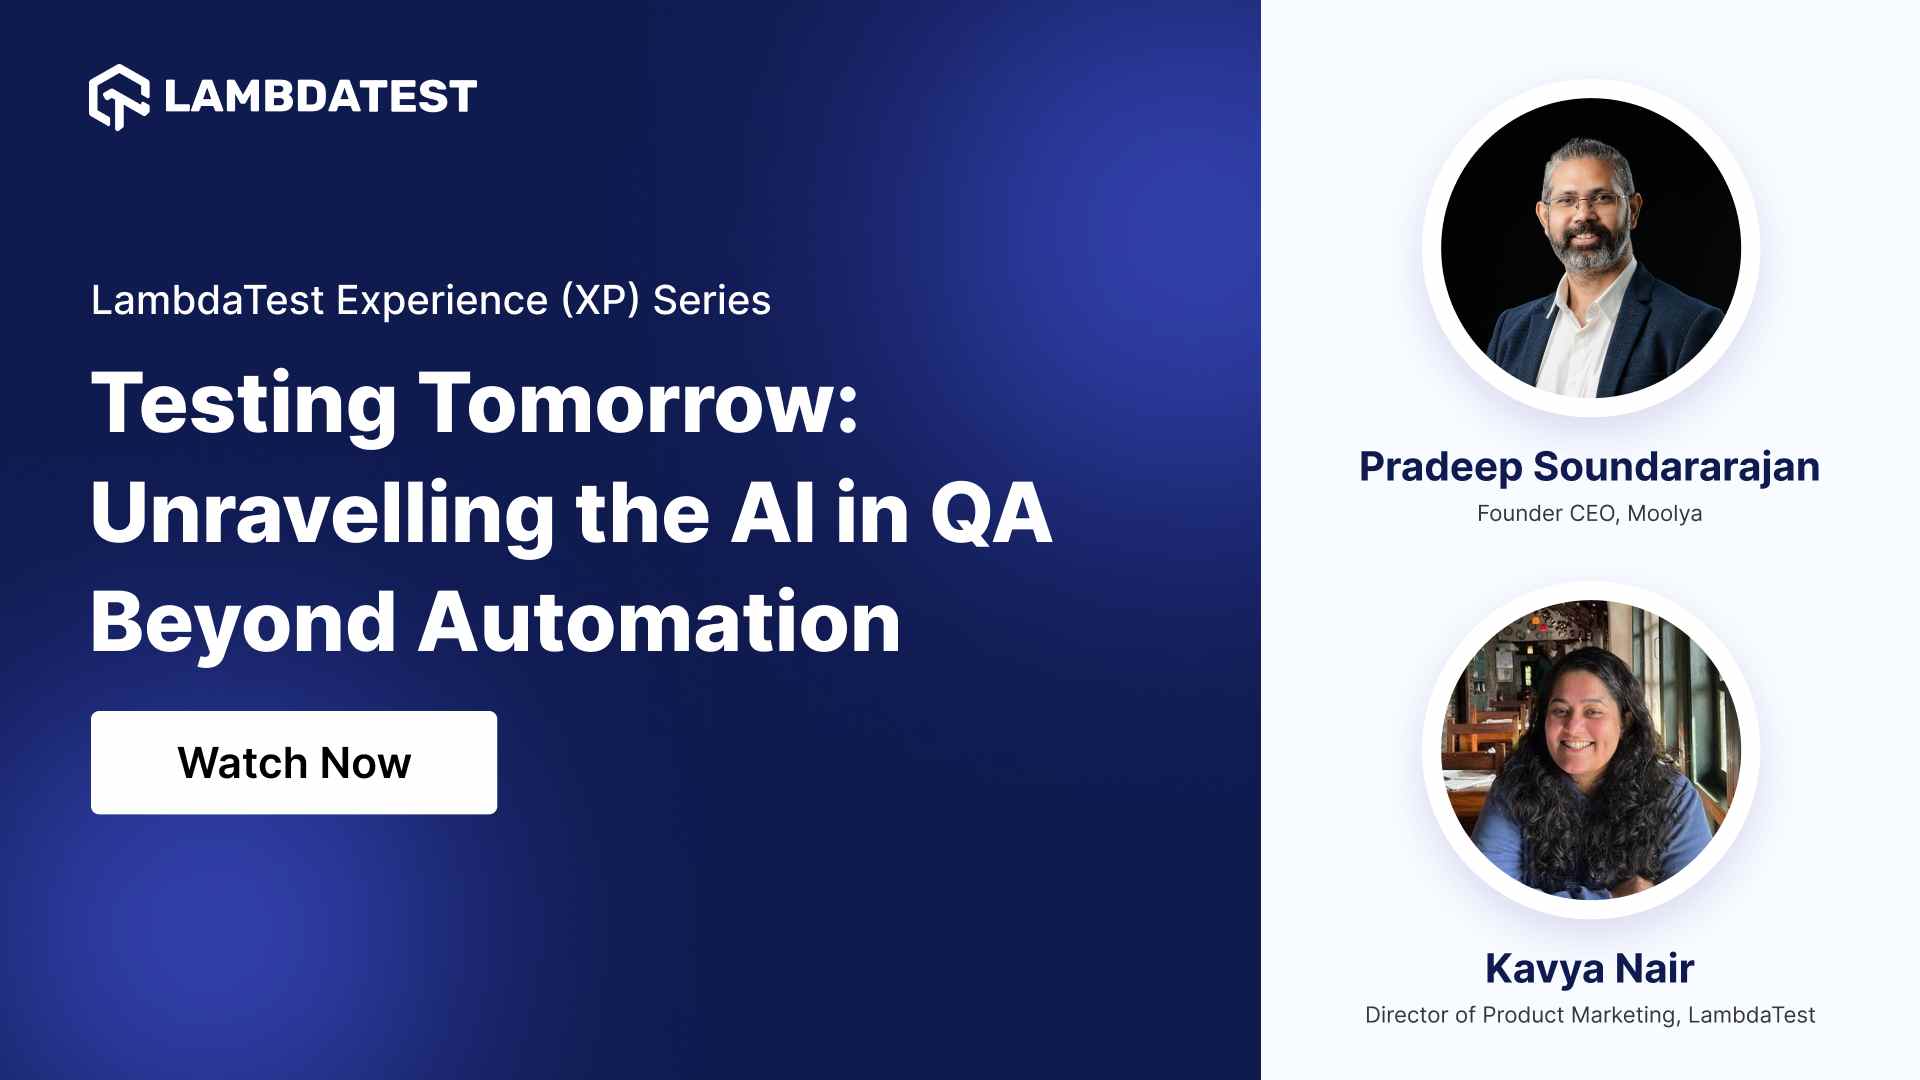 Testing Tomorrow: Unravelling the AI in QA Beyond Automation